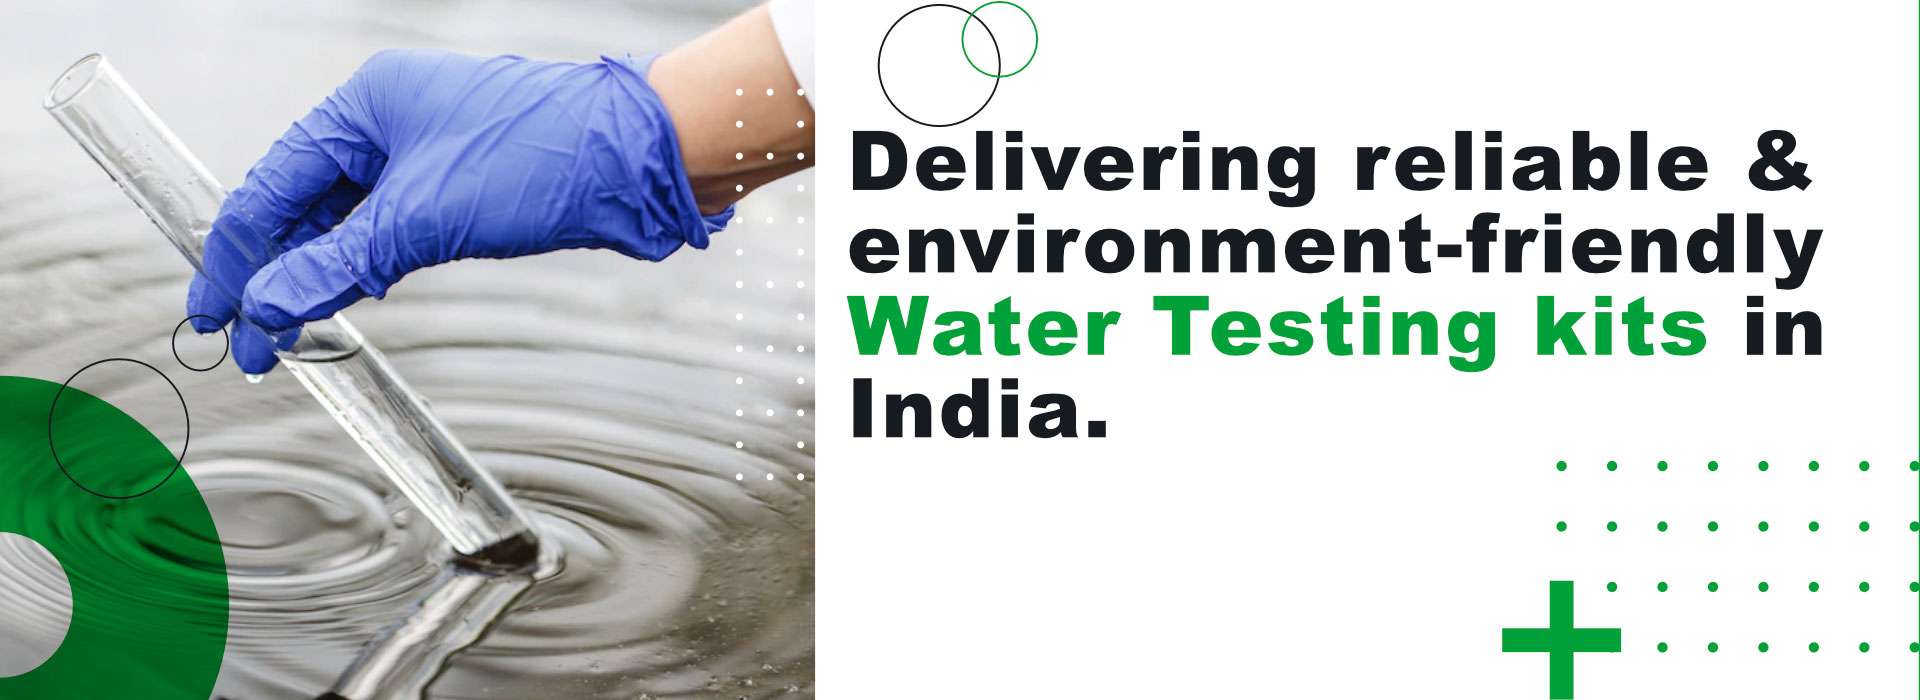  Delivering reliable & environment-friendly water Testing kits in India Manufacturers in Chennai